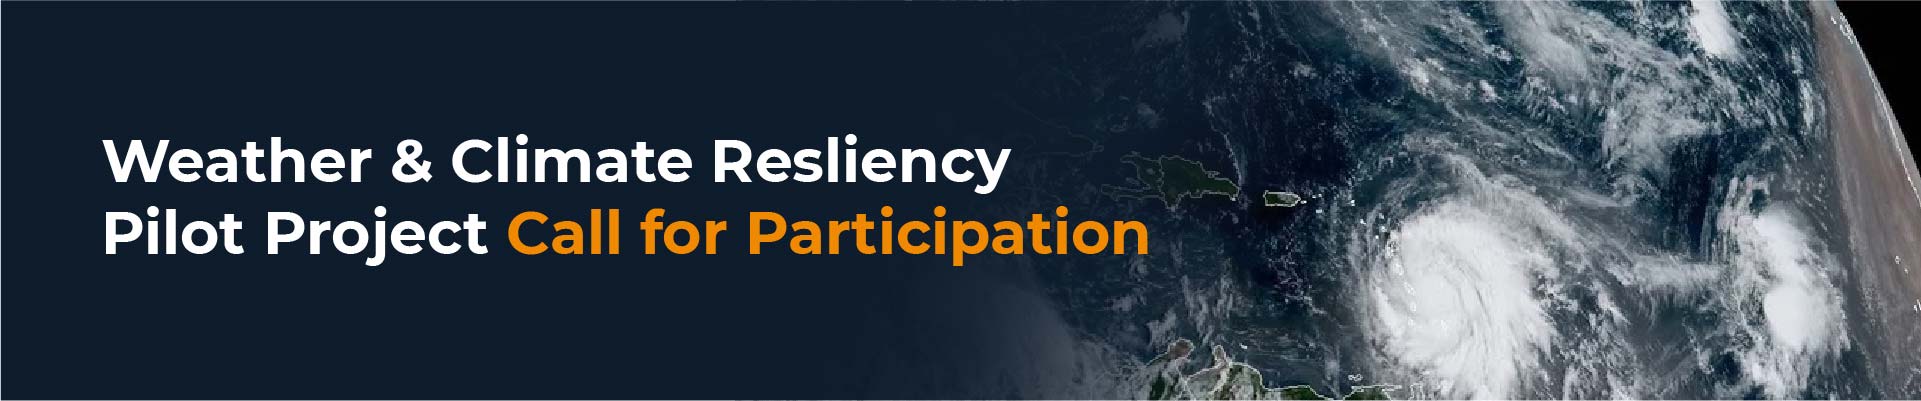 Weather and Climate Resiliency Pilot Project Call for Participation